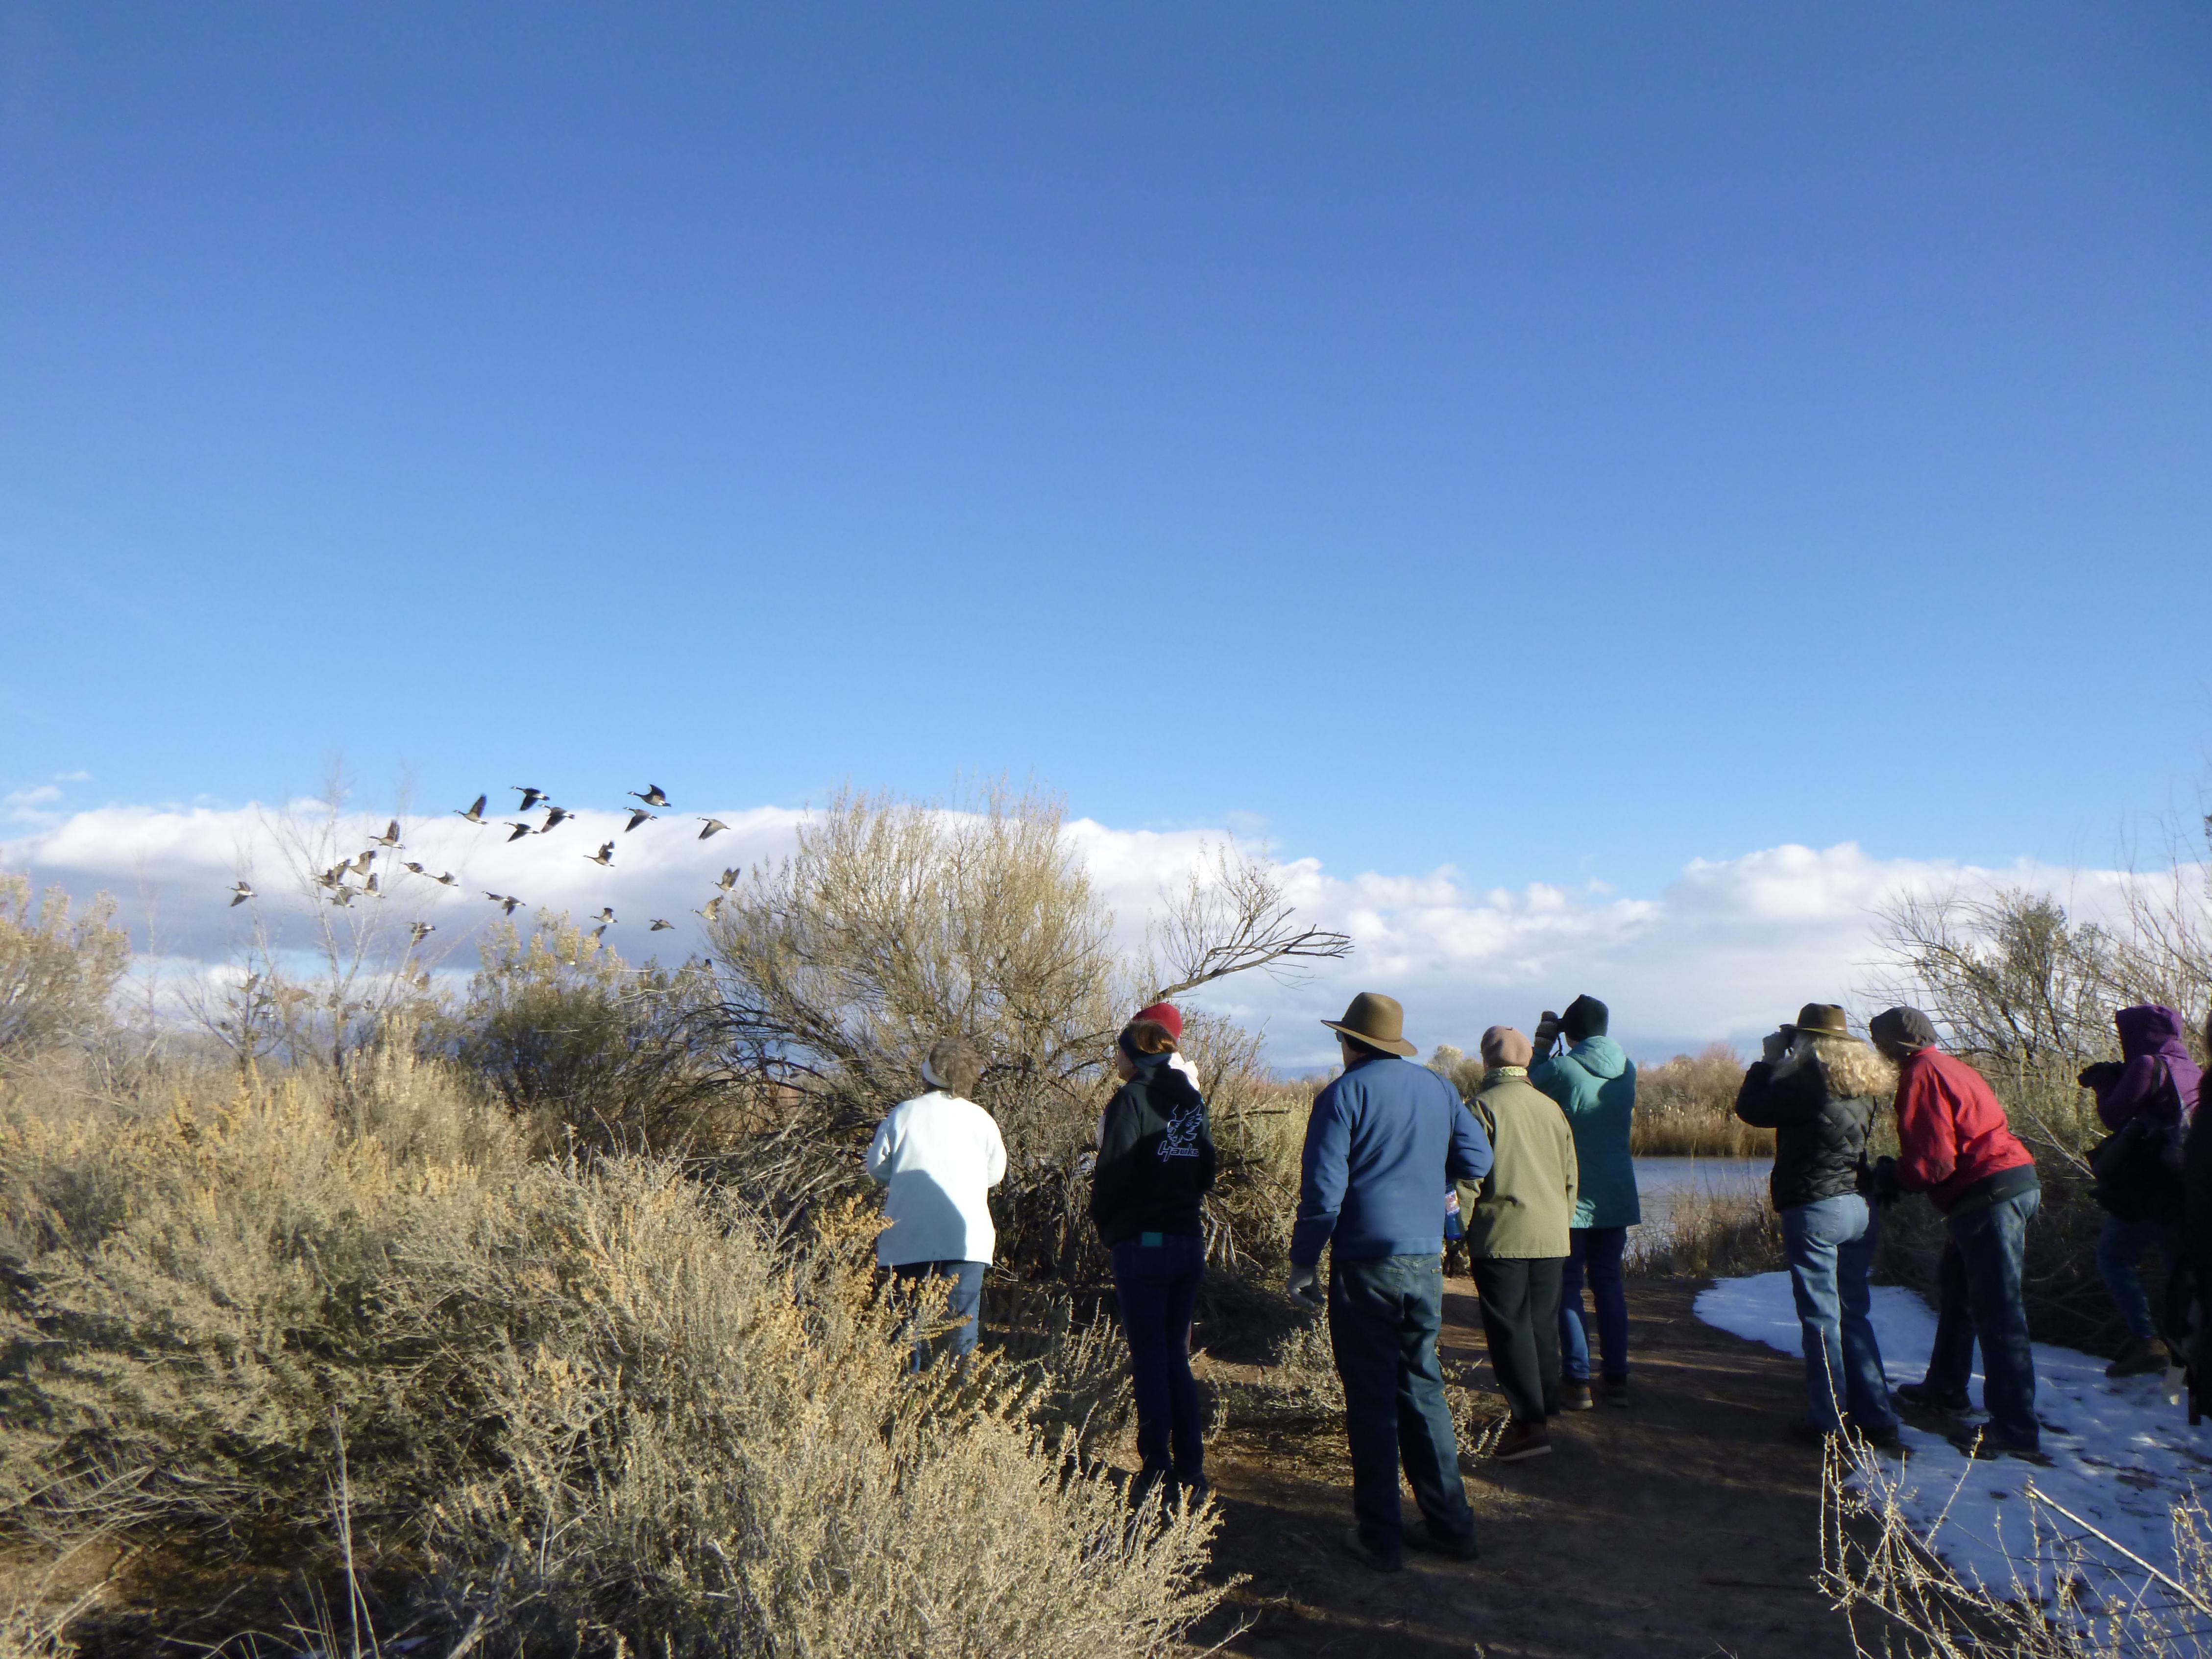 Image of the Rio Grande by the Bosque on a clear sky winter day. A group of adults to the right in winter attire stand near a trail of dirt and snow as they observe with binoculars a flock of birds flying to the left of the image.